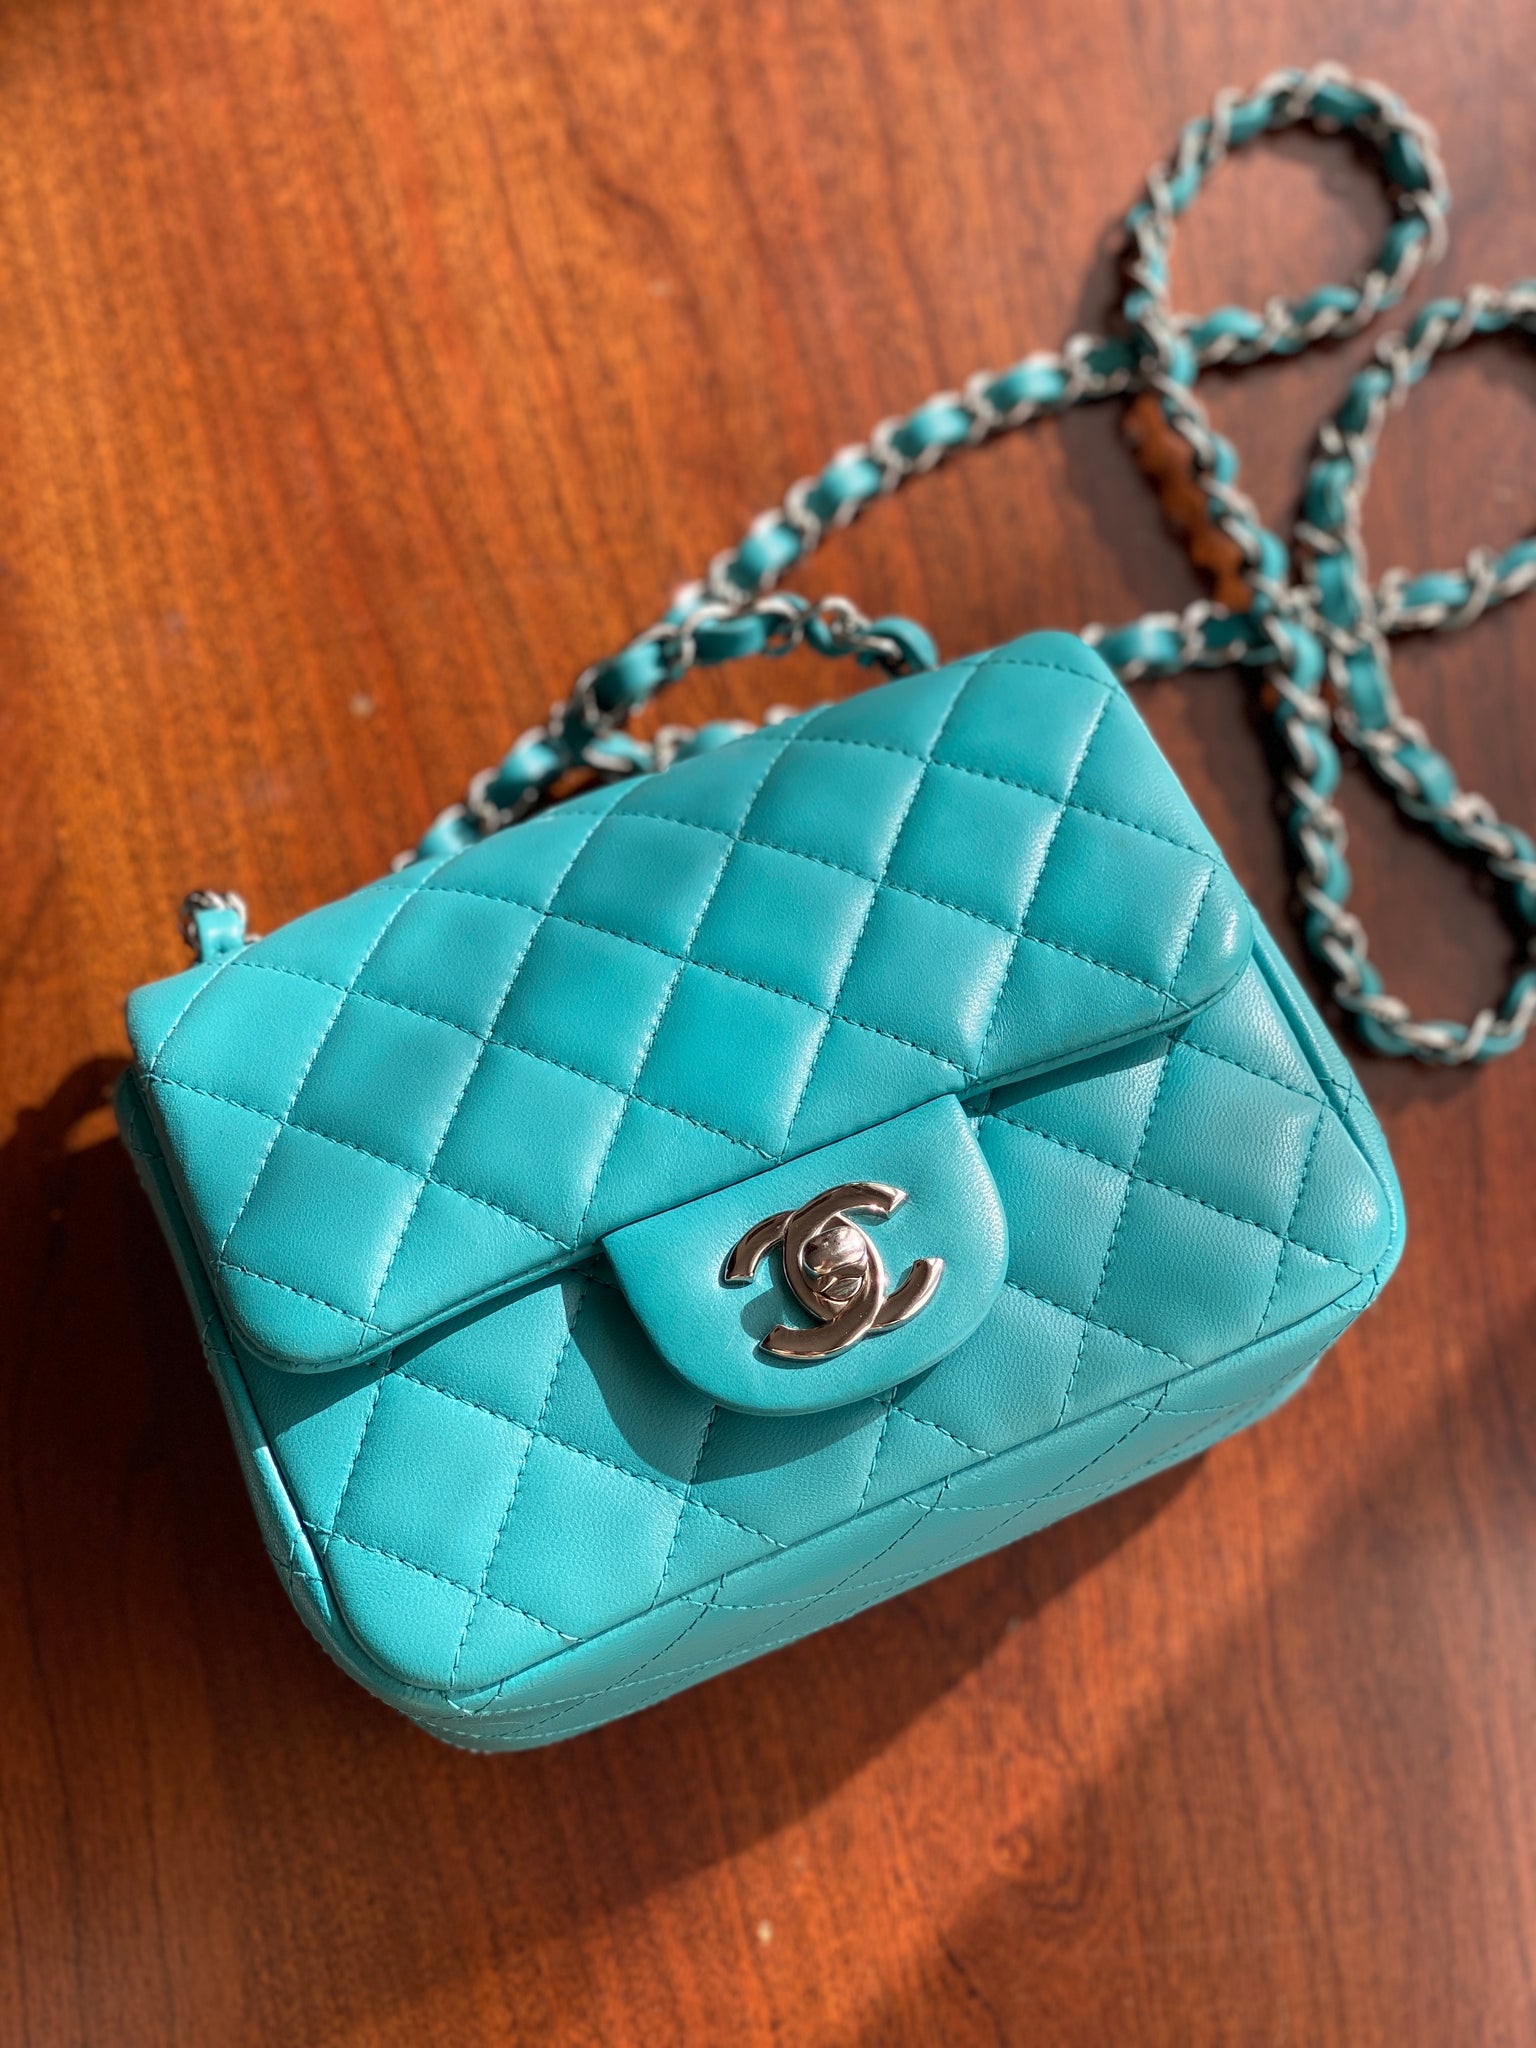 CHANEL, Bags, Rare Chanel Turquoise Blue Mini Flap Bag Gold Hardware